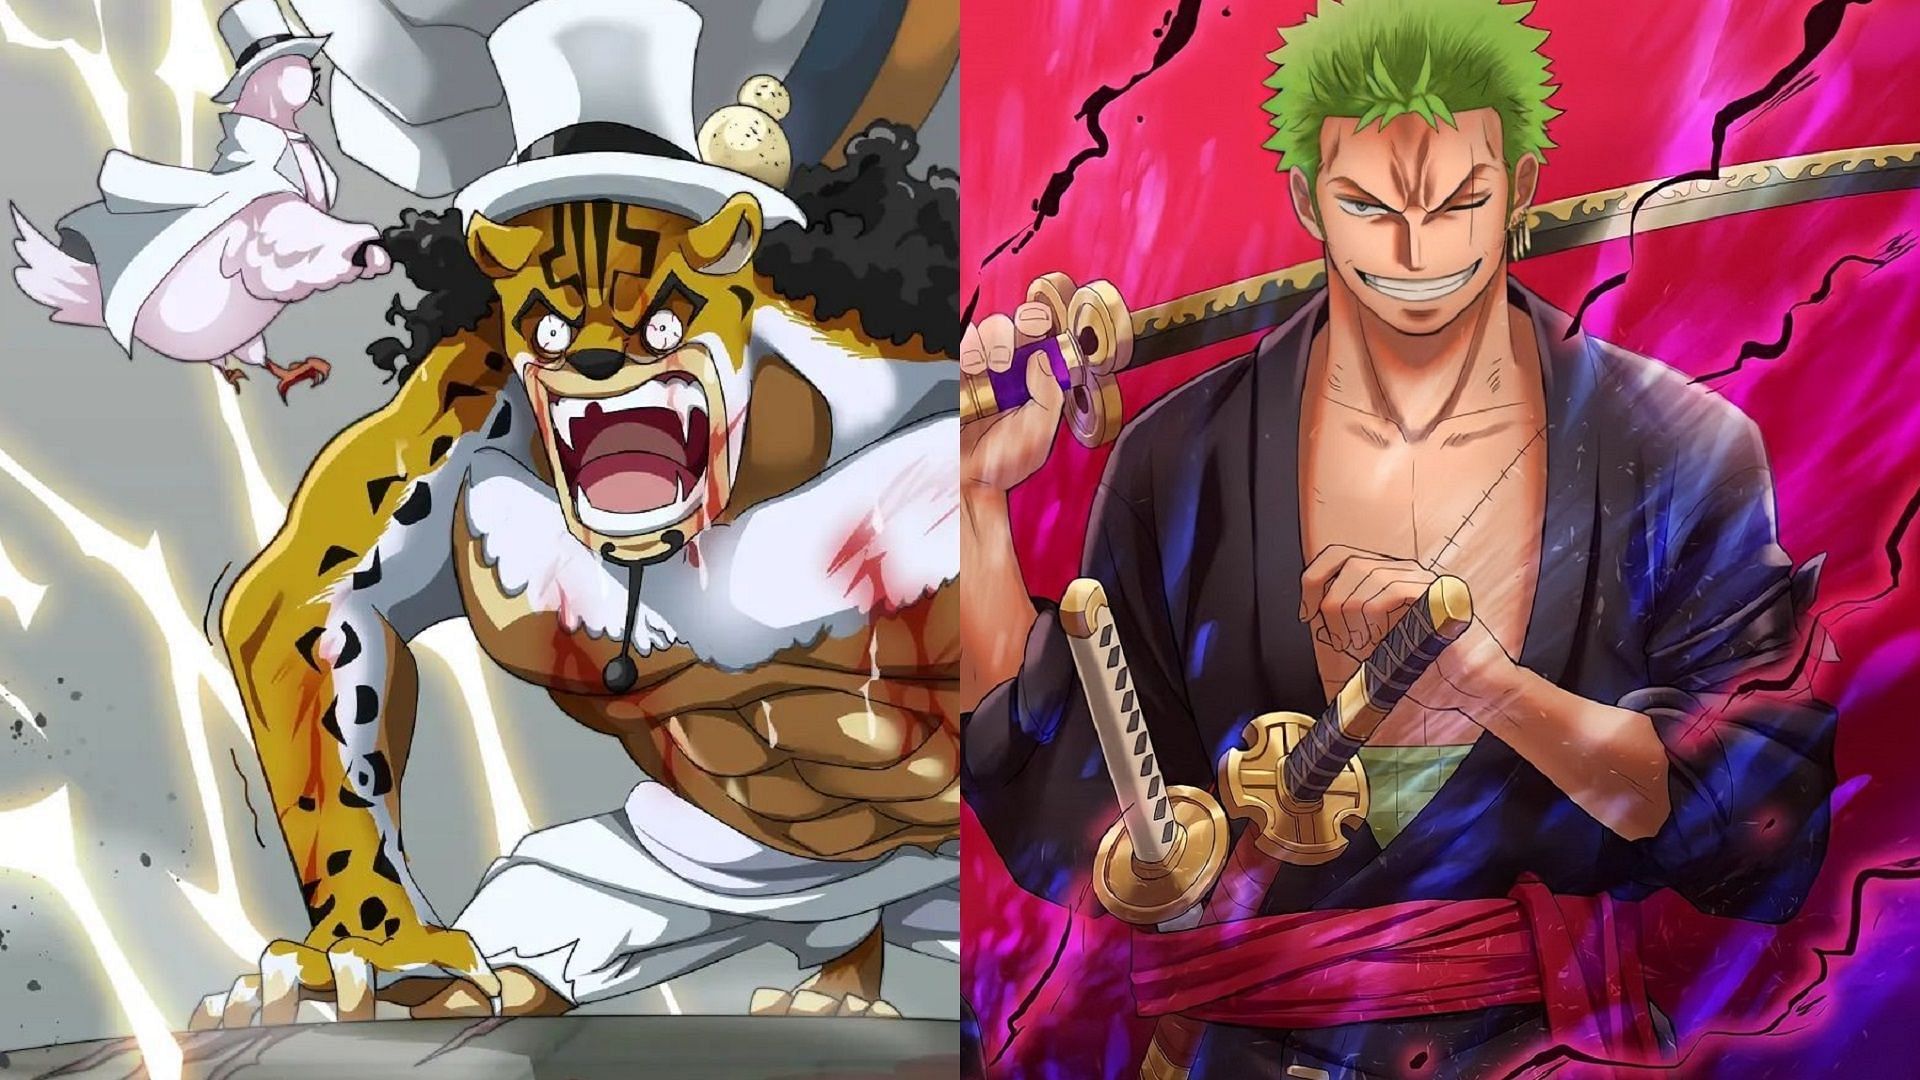 Even after witnessing Lucci&#039;s improved strength, the Strawhats considered him no match for Zoro (Image via Eiichiro Oda/Shueisha, One Piece)